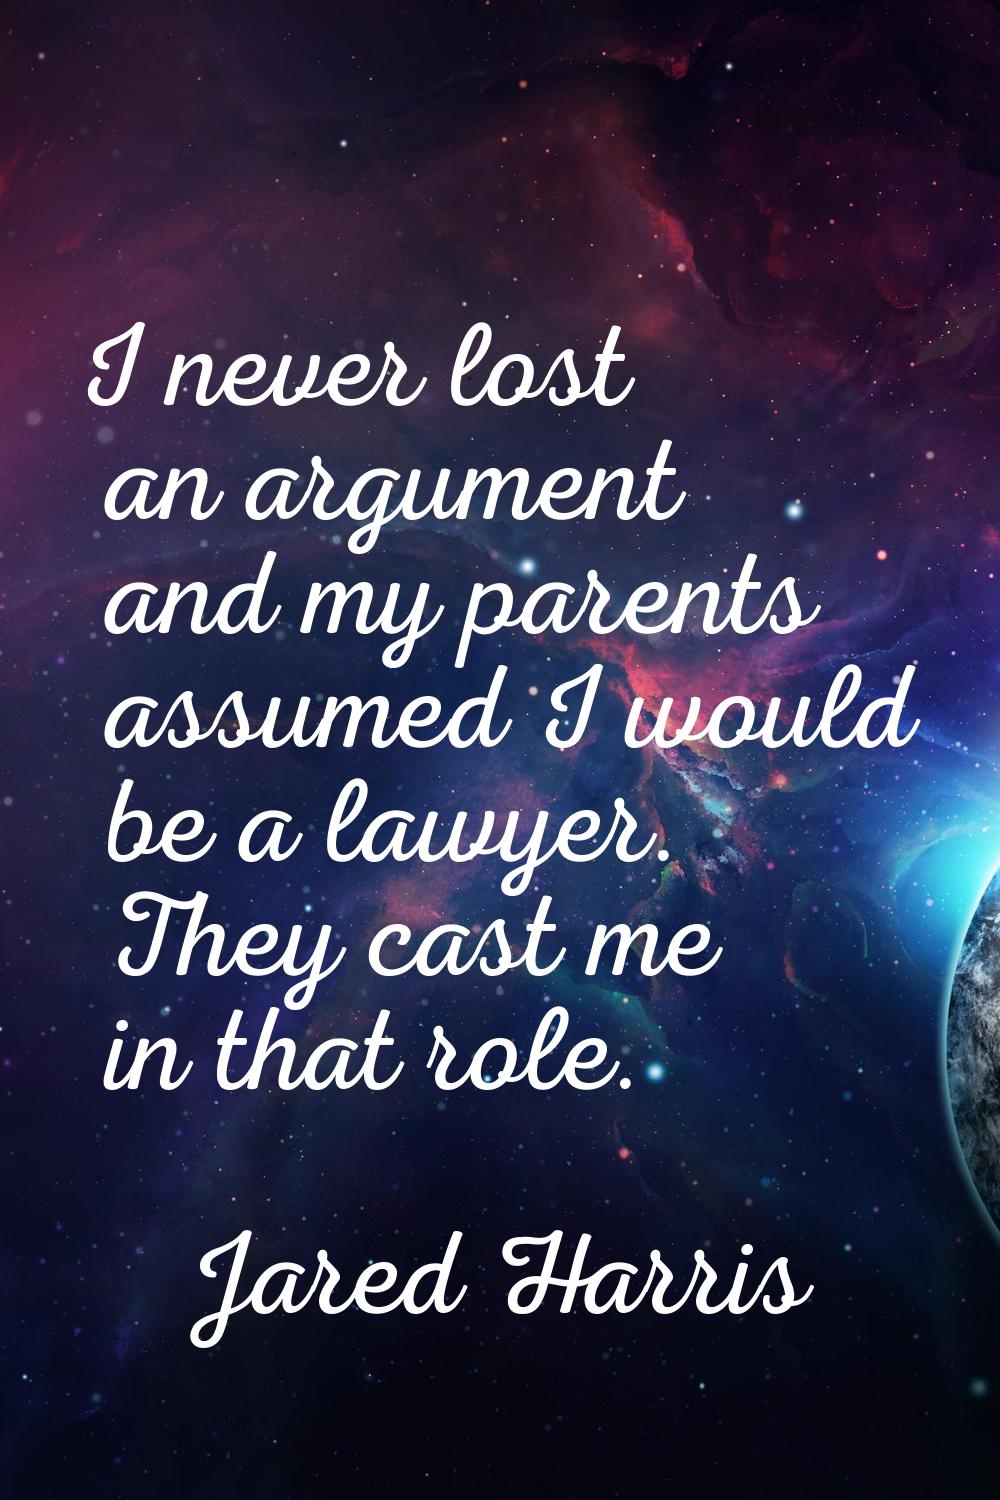 I never lost an argument and my parents assumed I would be a lawyer. They cast me in that role.